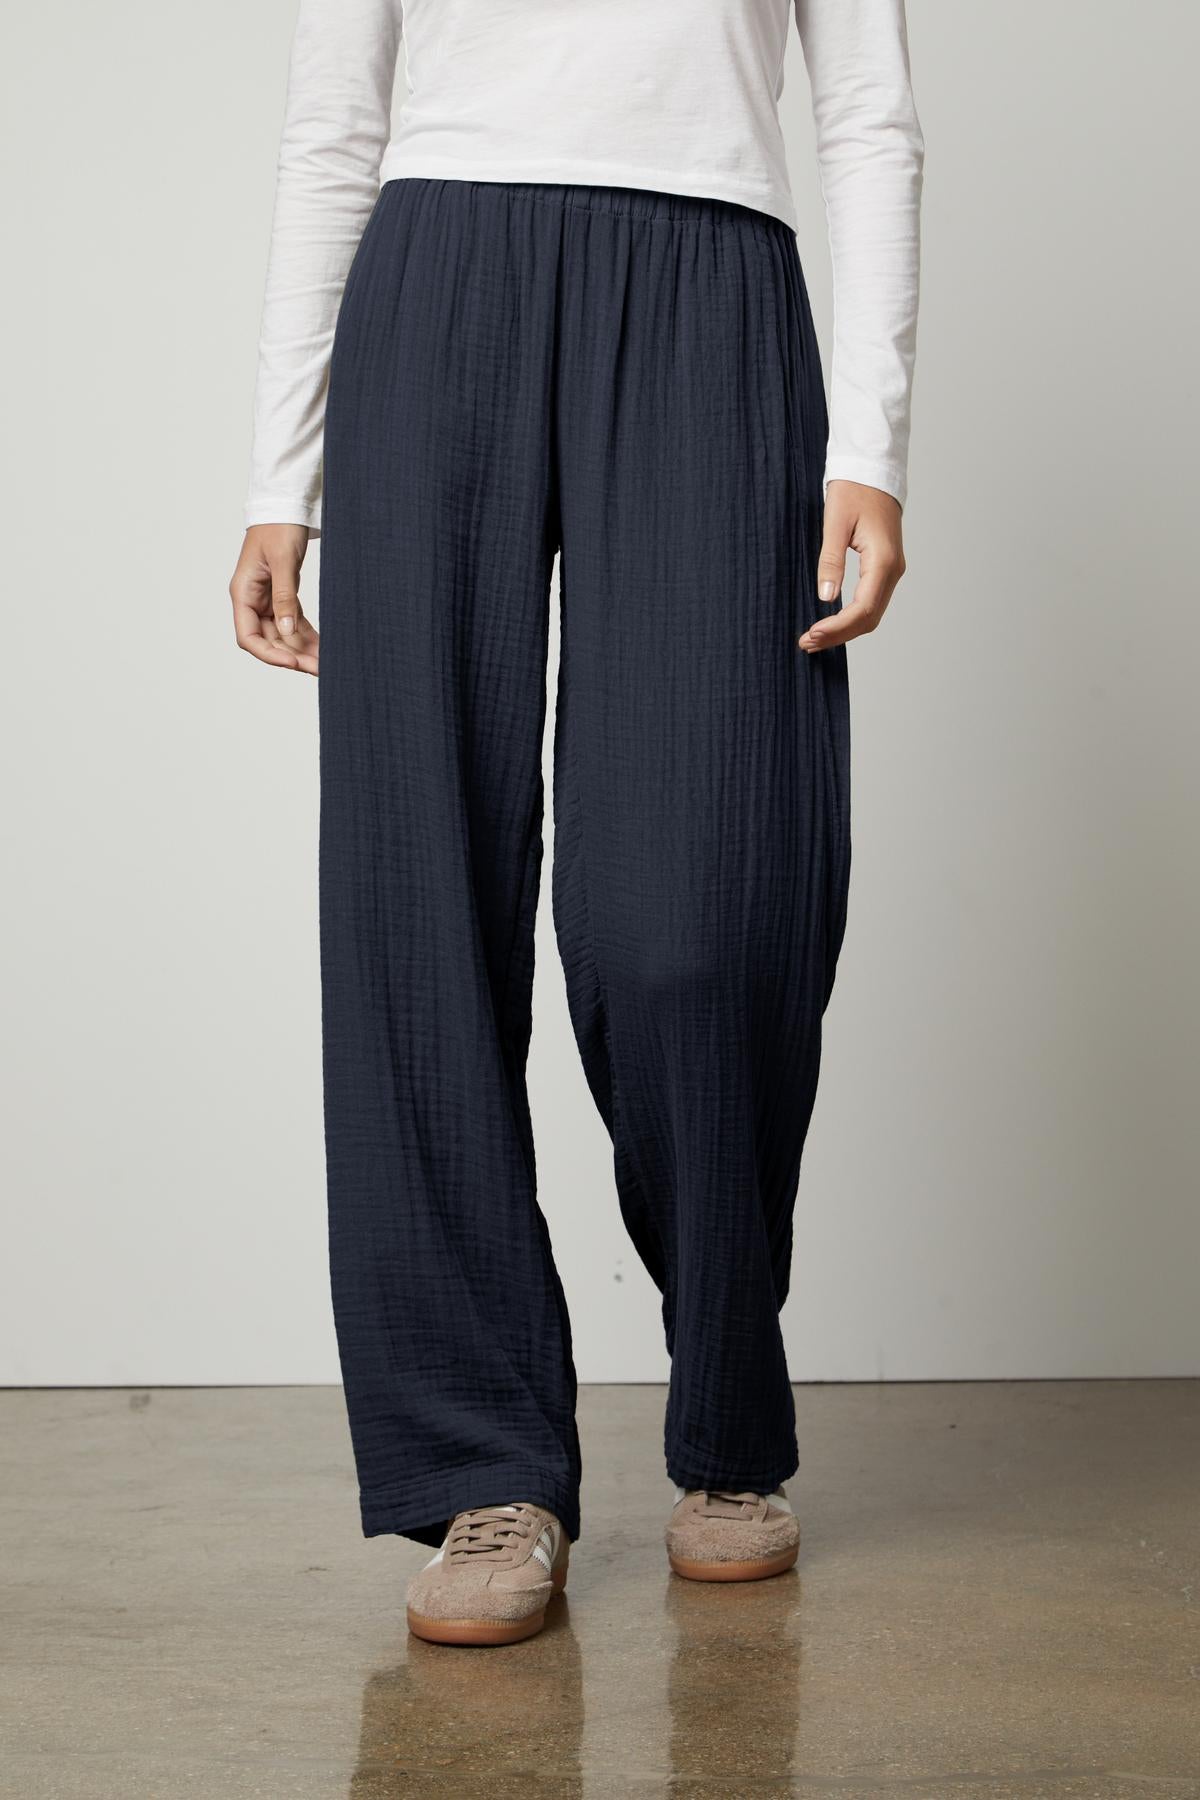   Woman standing in the Velvet by Graham & Spencer JERRY COTTON GAUZE PANT with an elastic waistband and white top, with hands slightly touching the pockets, paired with brown shoes. 